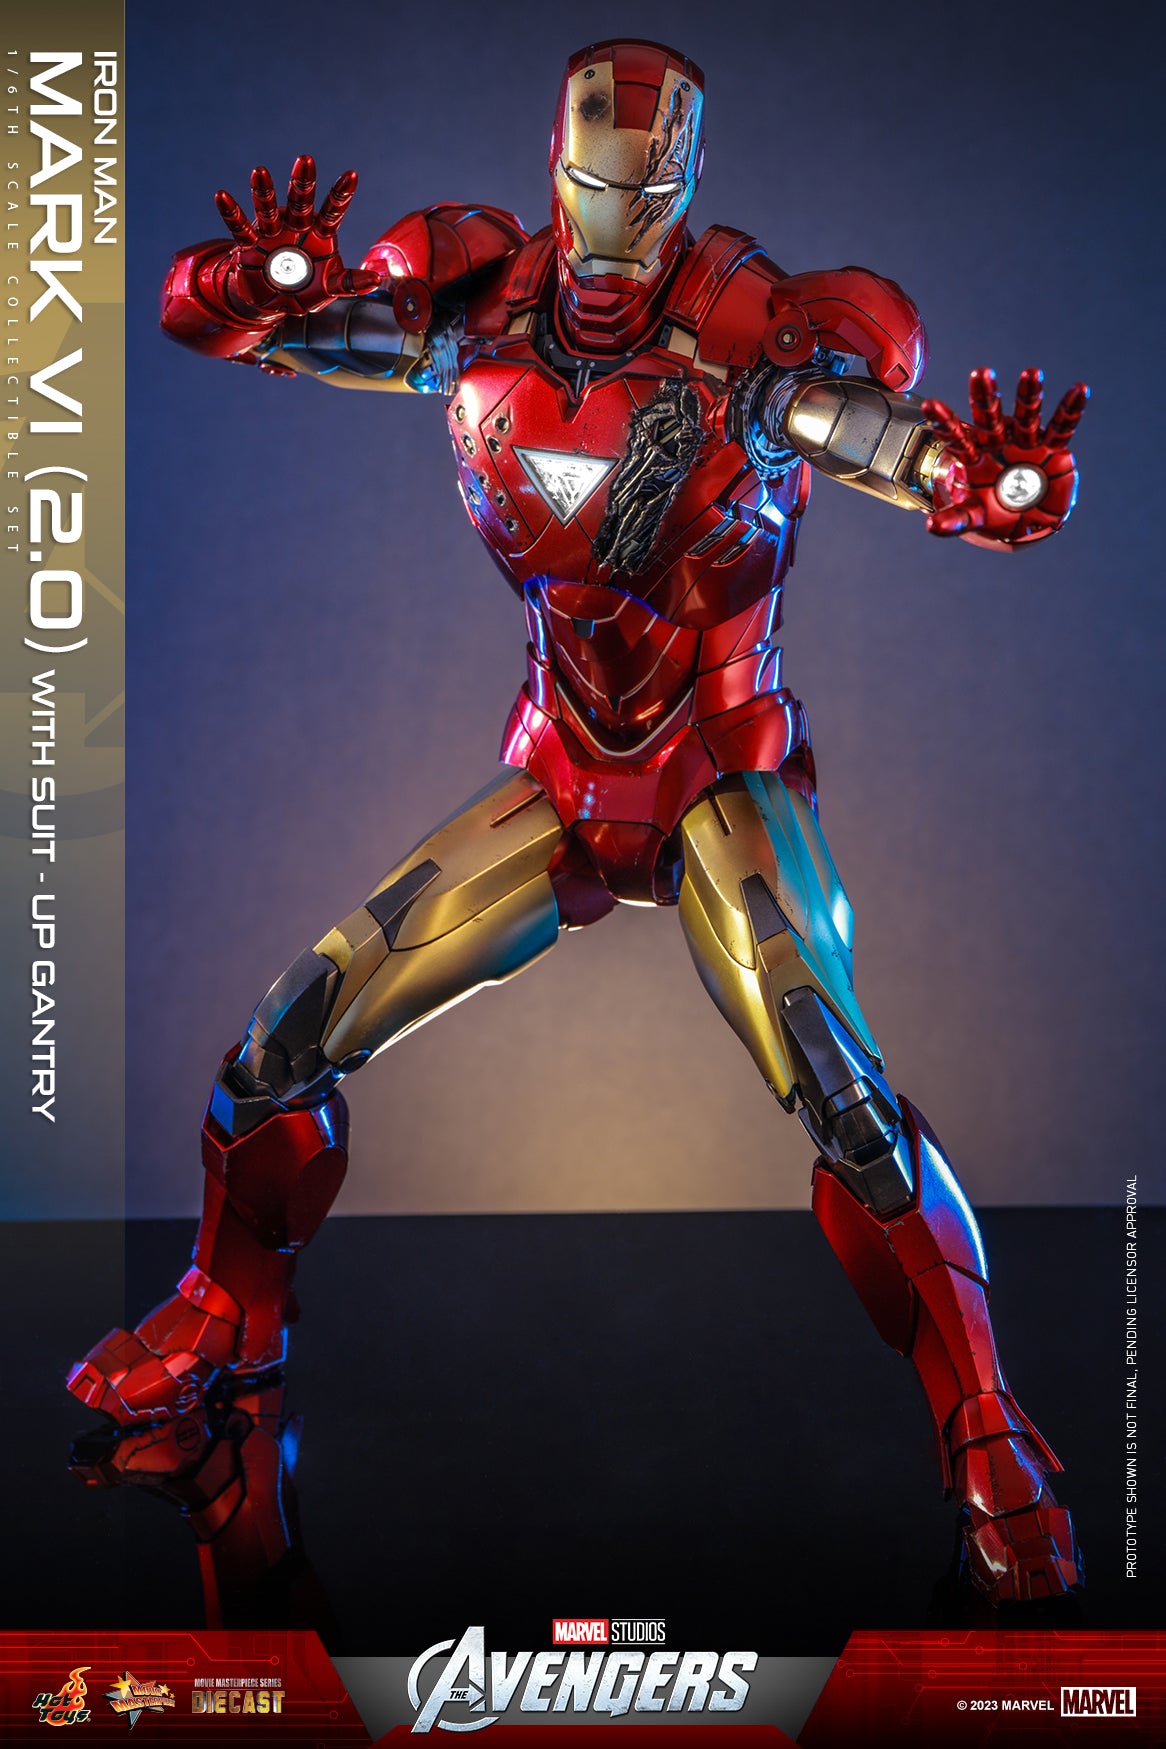 Hot Toys - MMS688D53 - The Avengers - Iron Man Mark VI (2.0) with Suit-Up Gantry - Marvelous Toys